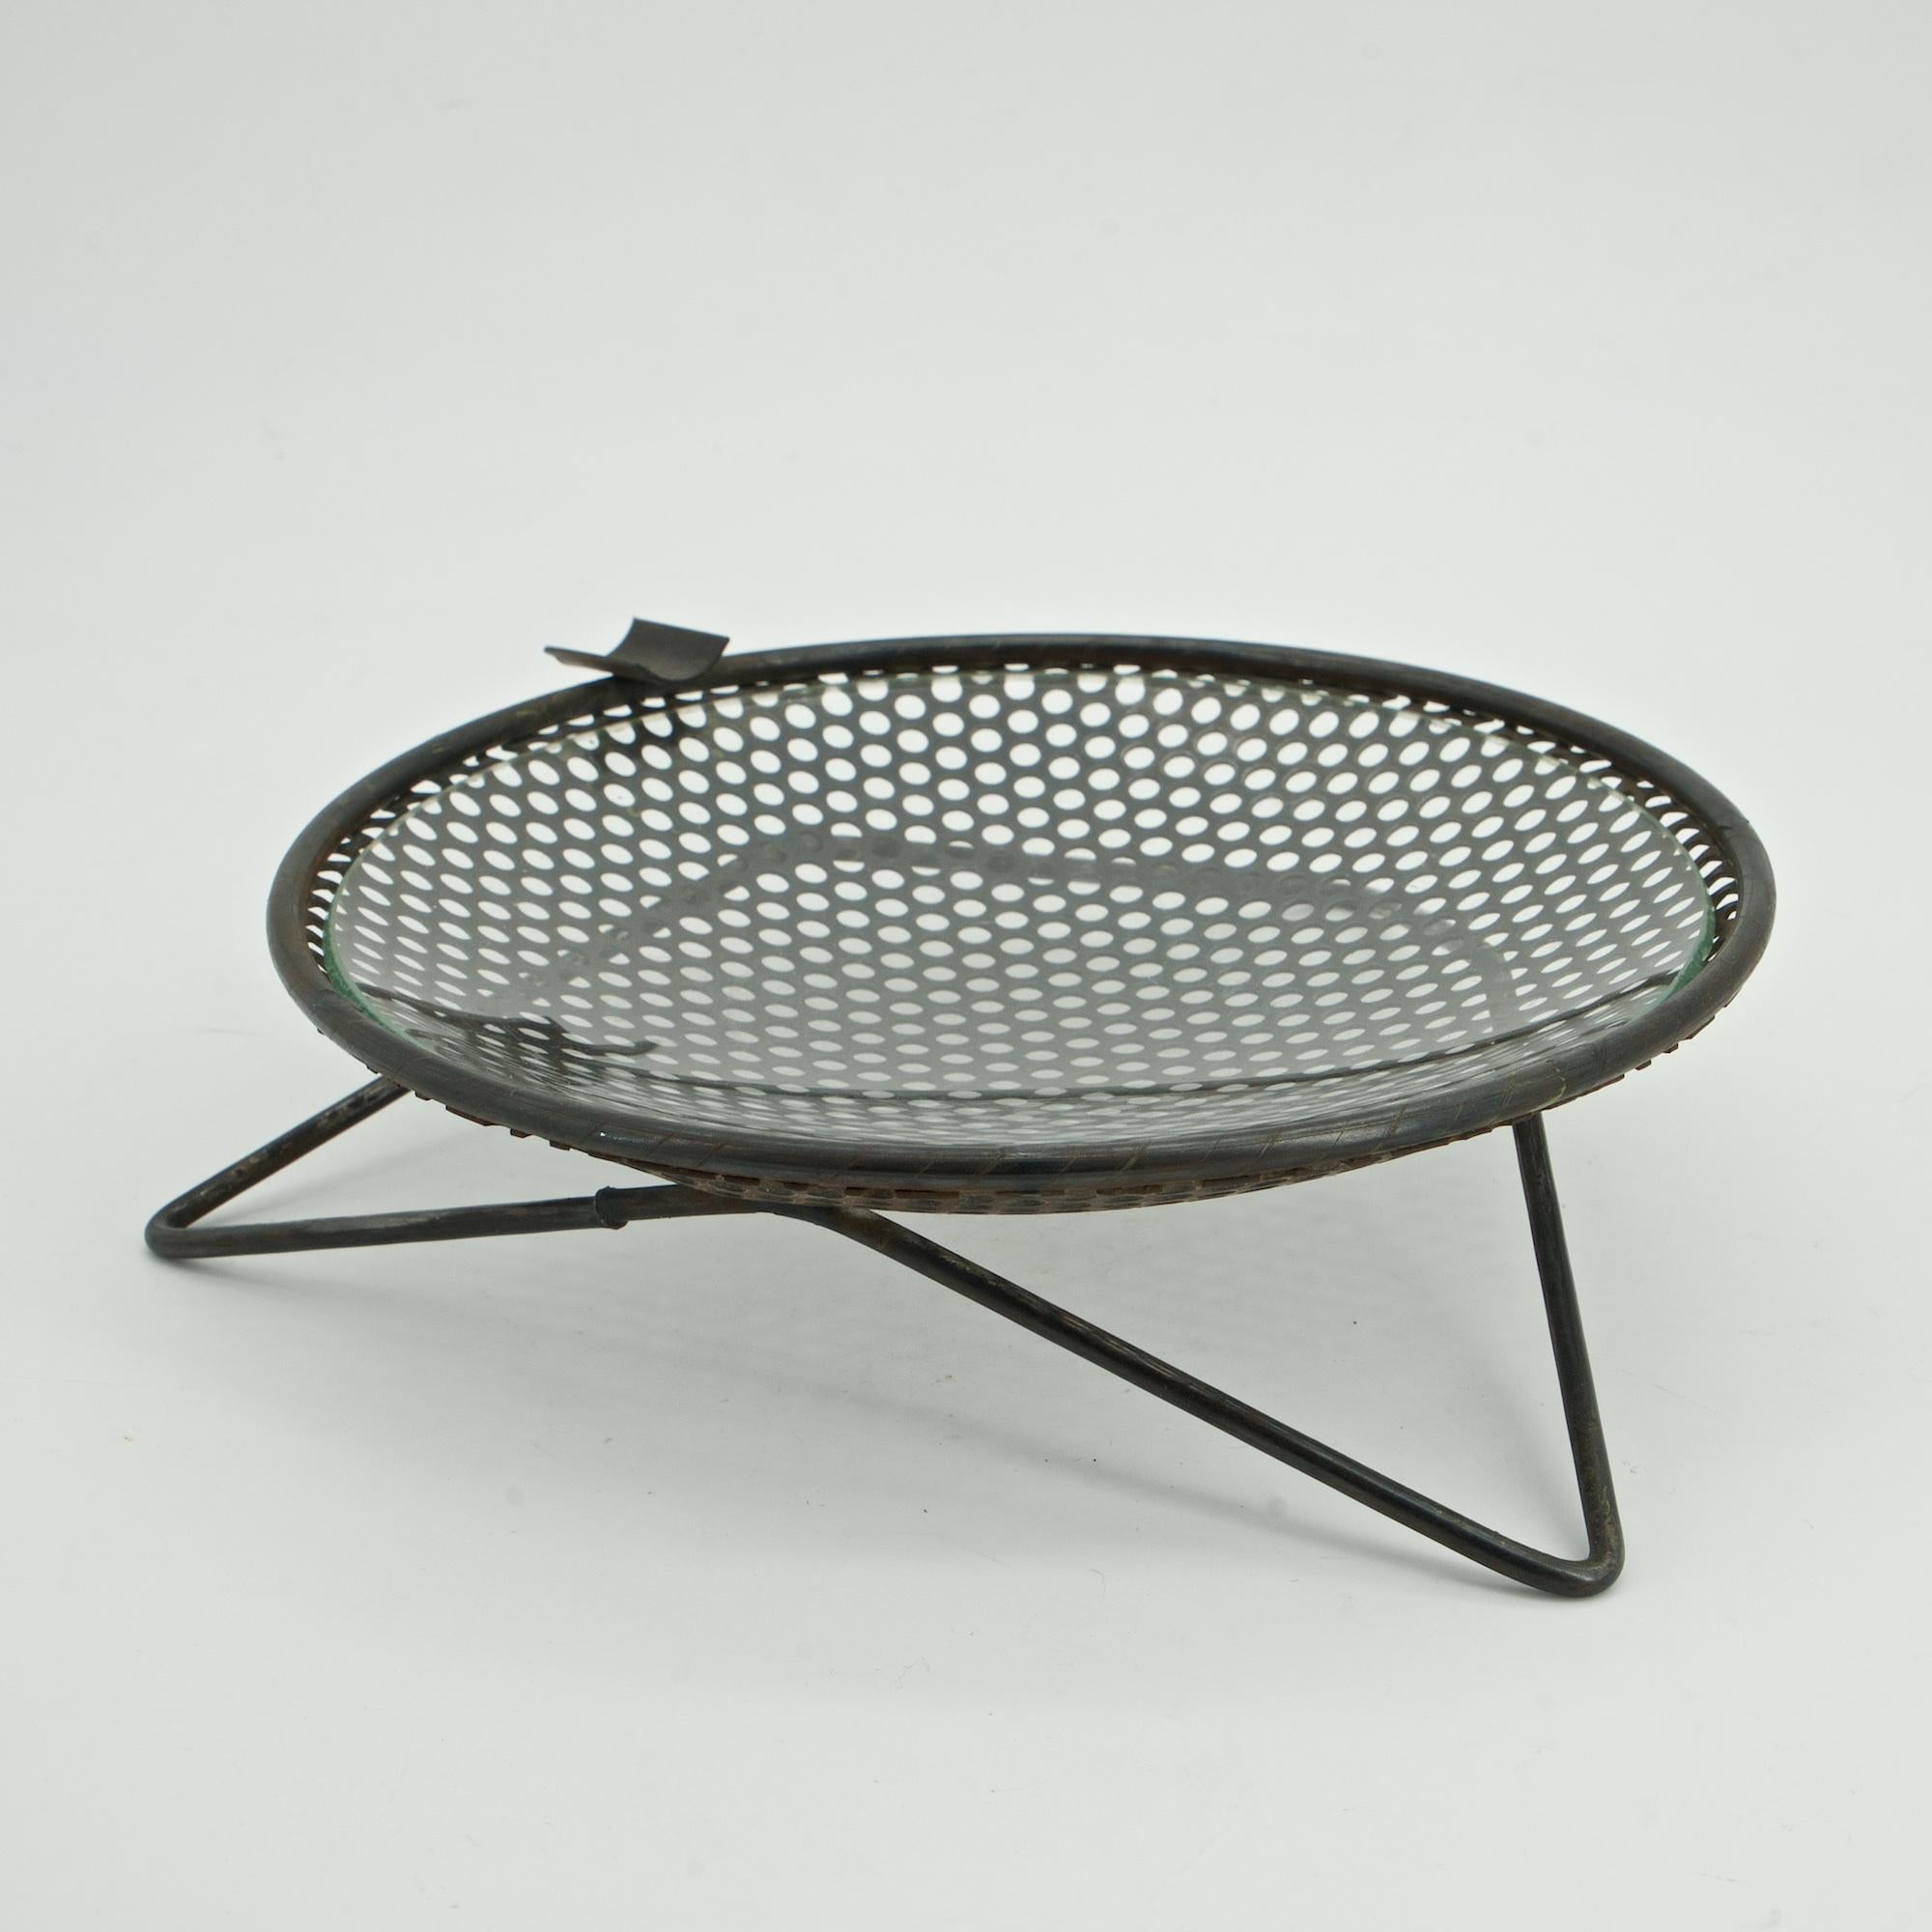 American 1950s Perforated Metal Atomic Dish Ashtray Nº S30 by Richard Galef Ravenware For Sale